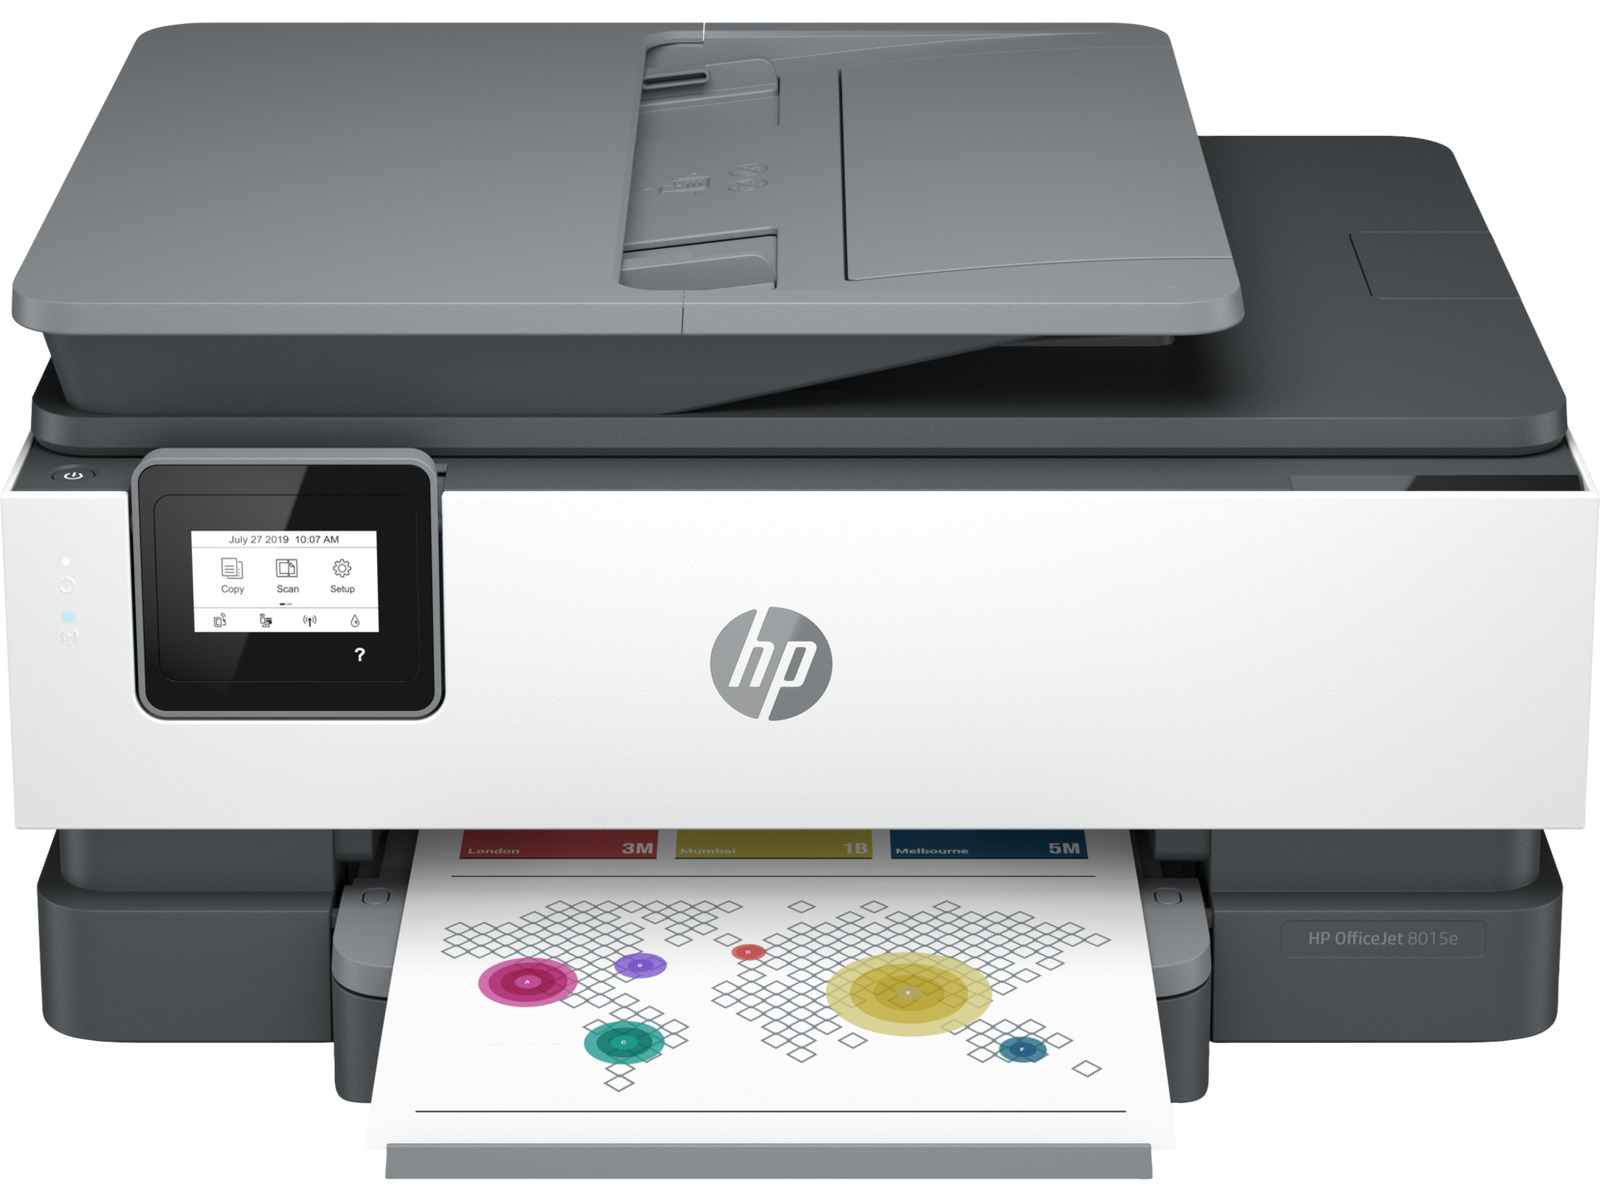 HP OfficeJet 8015e All-in-One Printer w/ bonus 6 months Instant Ink through HP+. Available Now for 